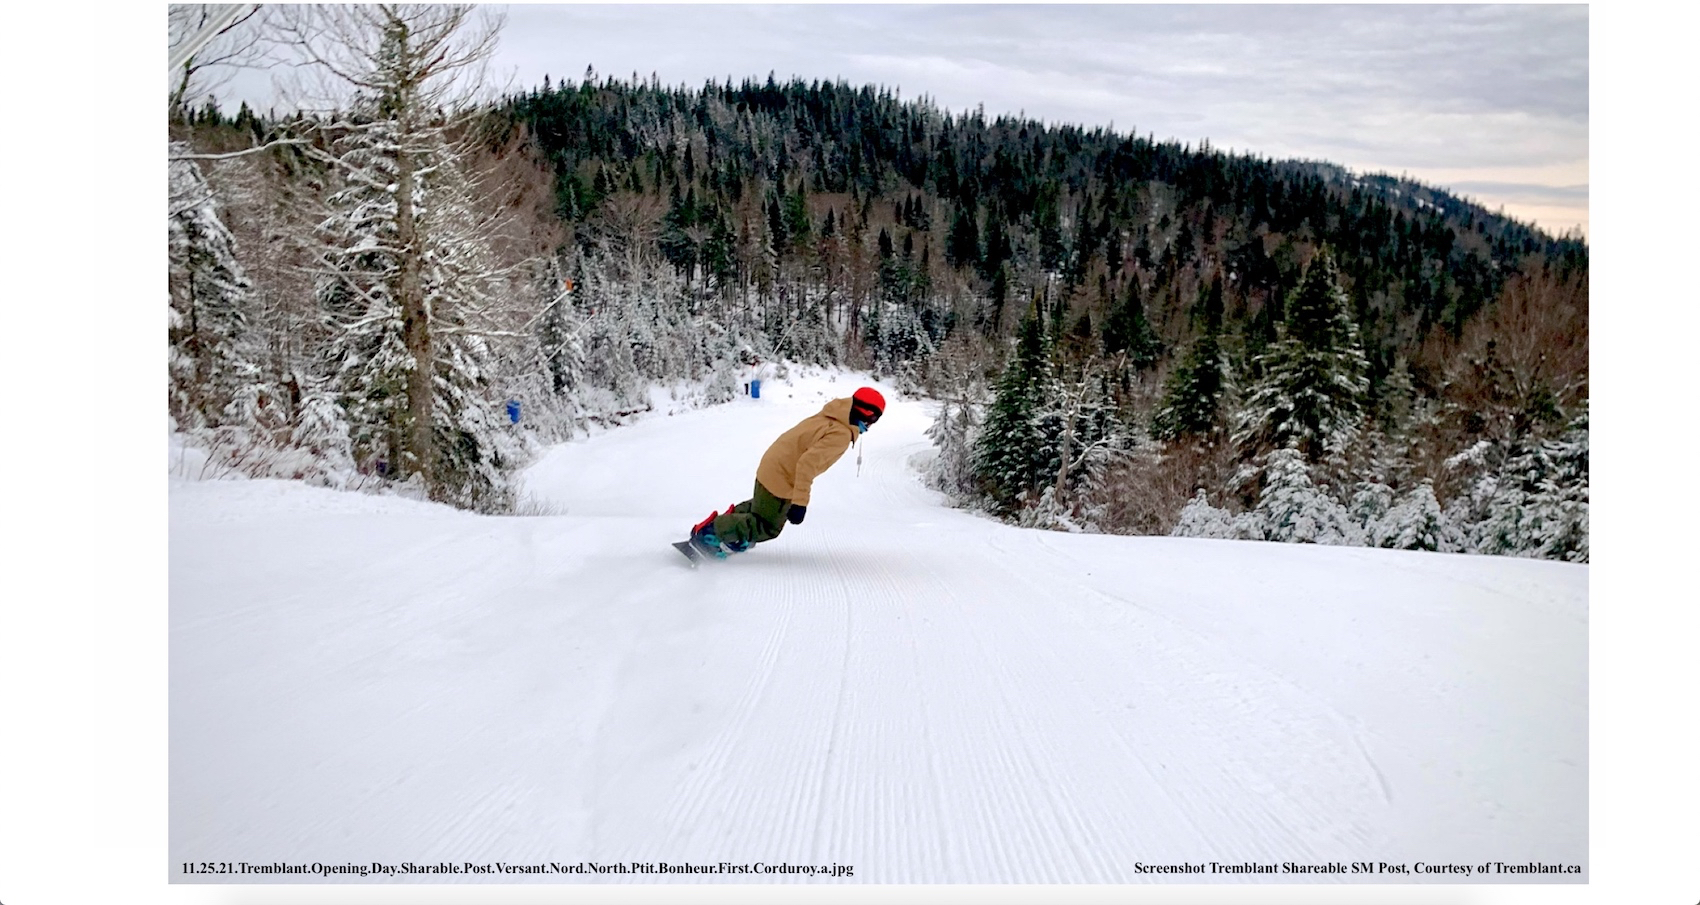 11.25.21.Tremblant.Opening.Day.Sharable.Post.Versant.Nord.North.Ptit.Bonheur.First.Corduroy.a.jpg